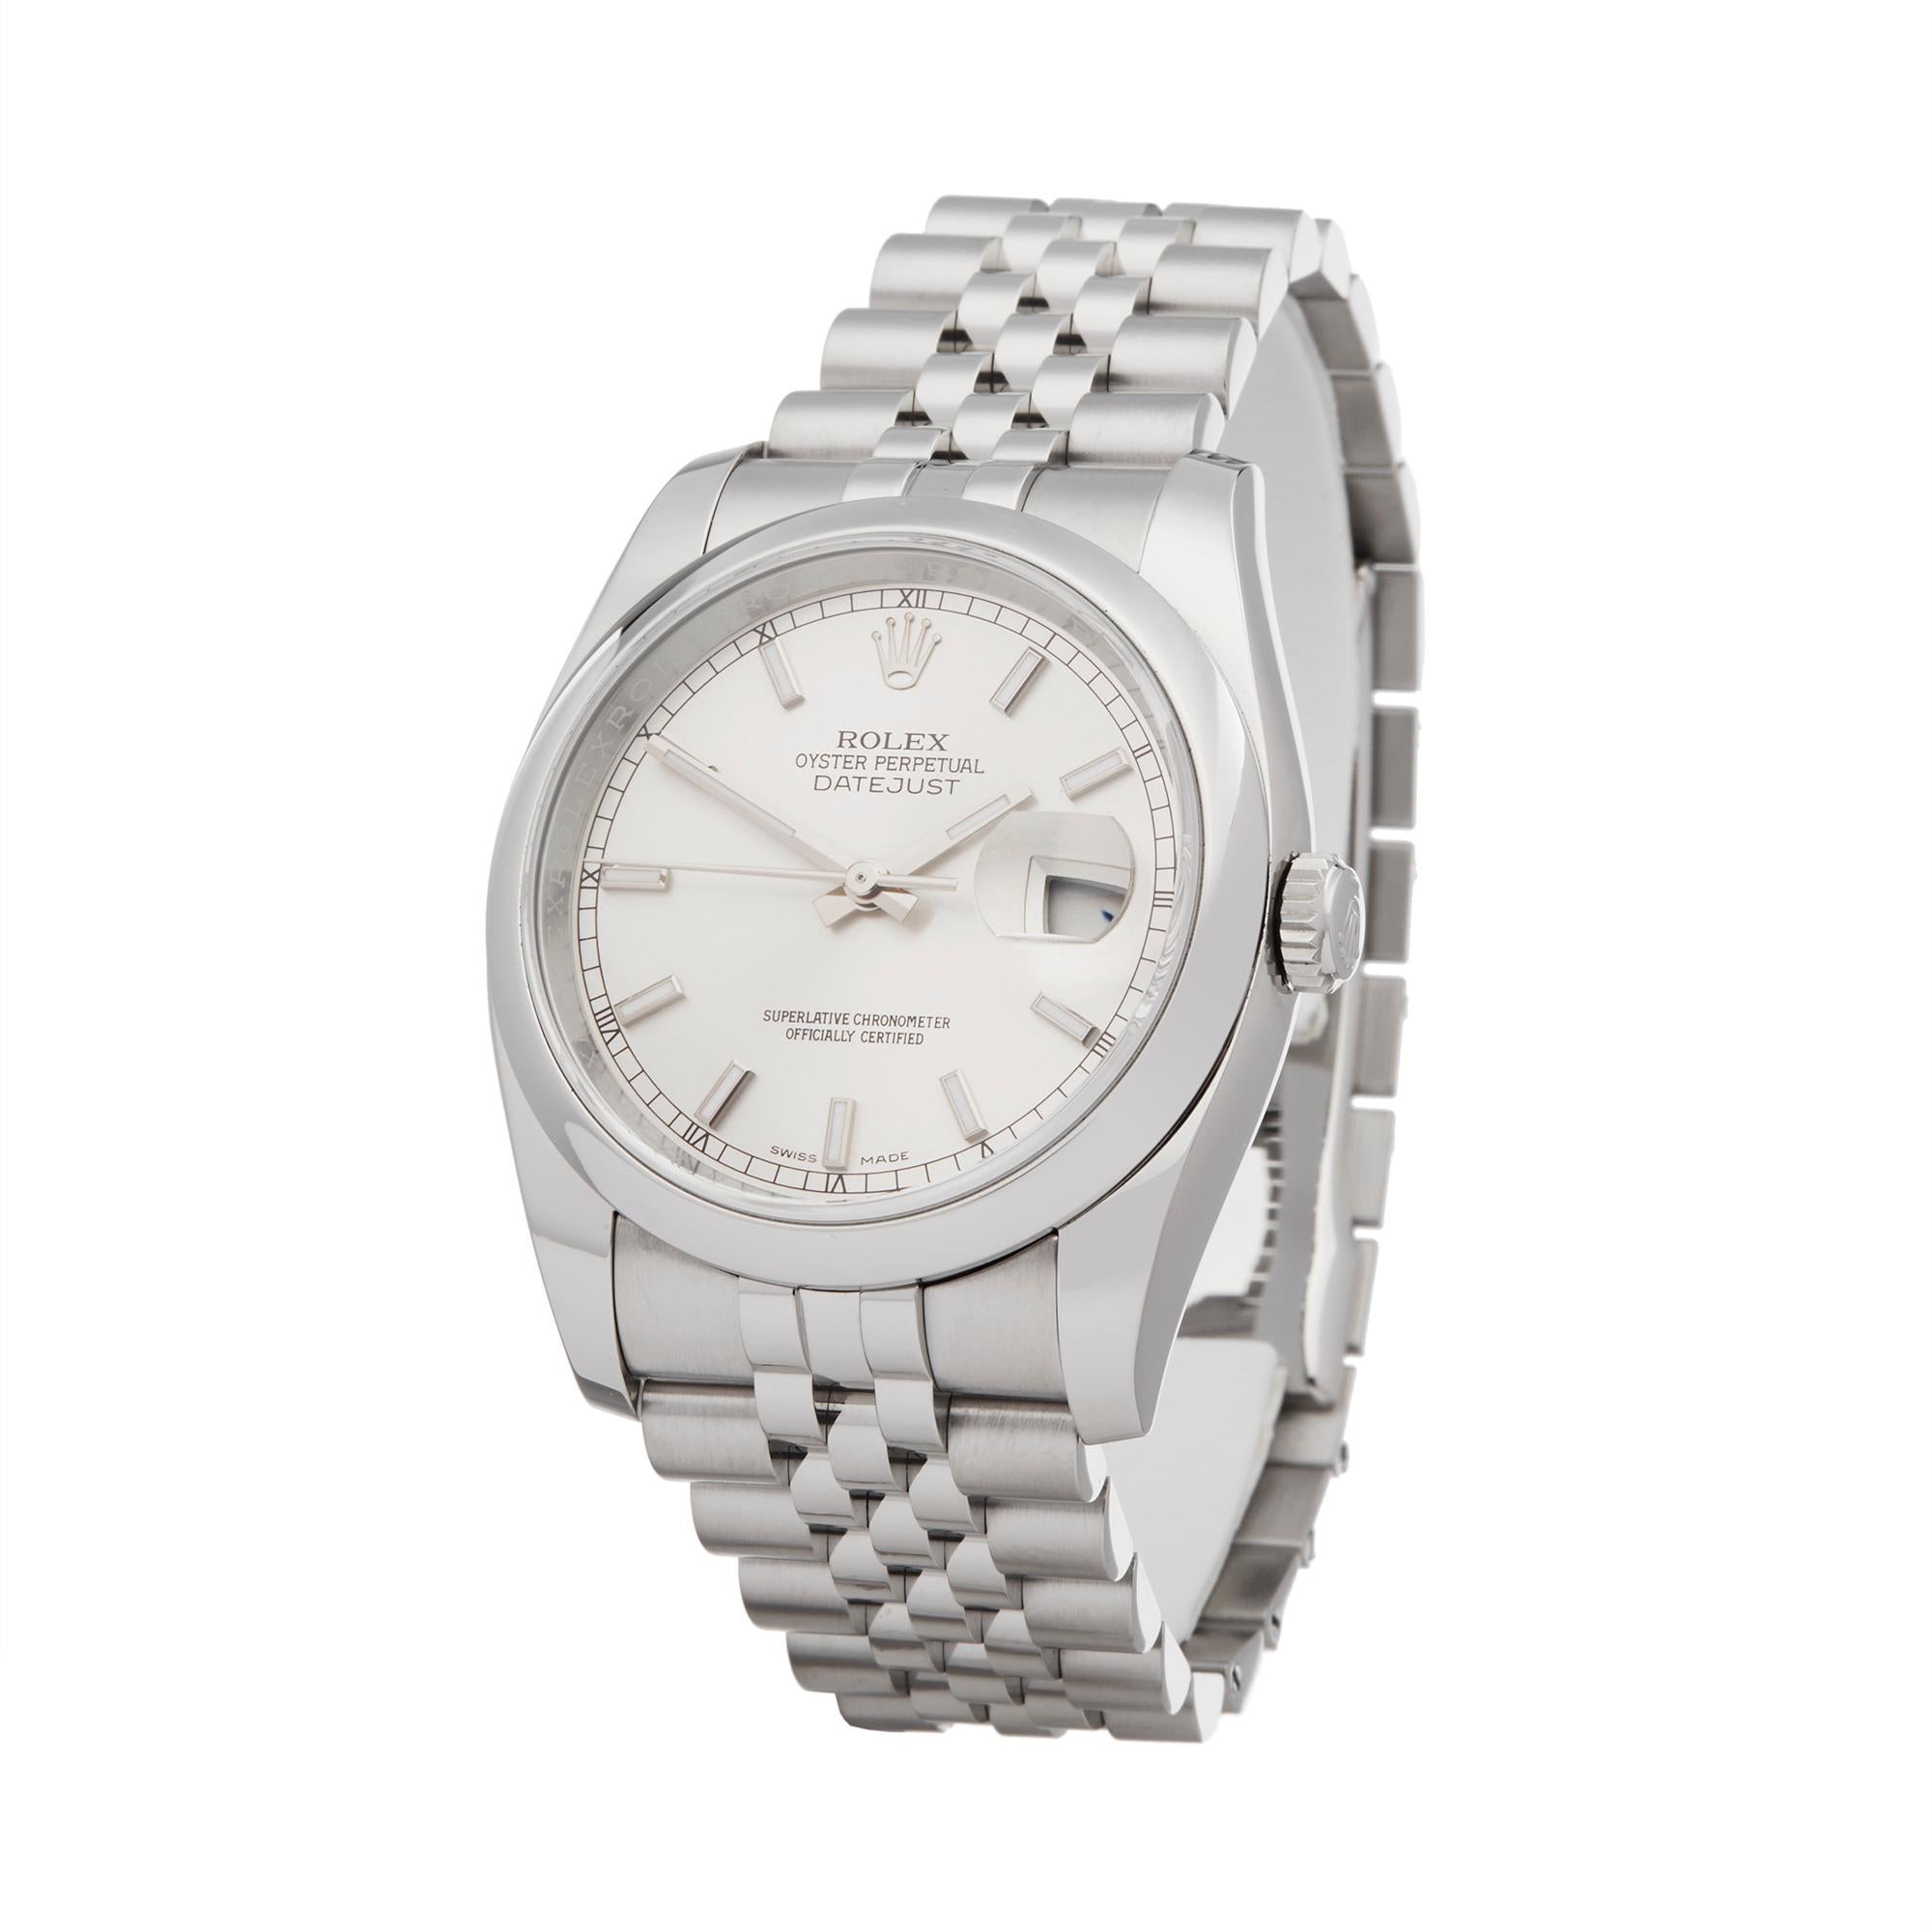 Ref: W6188
Manufacturer: Rolex
Model: DateJust
Model Ref: 116200
Age: 14th September 2015
Gender: Unisex
Complete With: Box, Manuals, Guarantee  & Booklet
Dial: Silver Baton
Glass: Sapphire Crystal
Movement: Automatic
Water Resistance: To